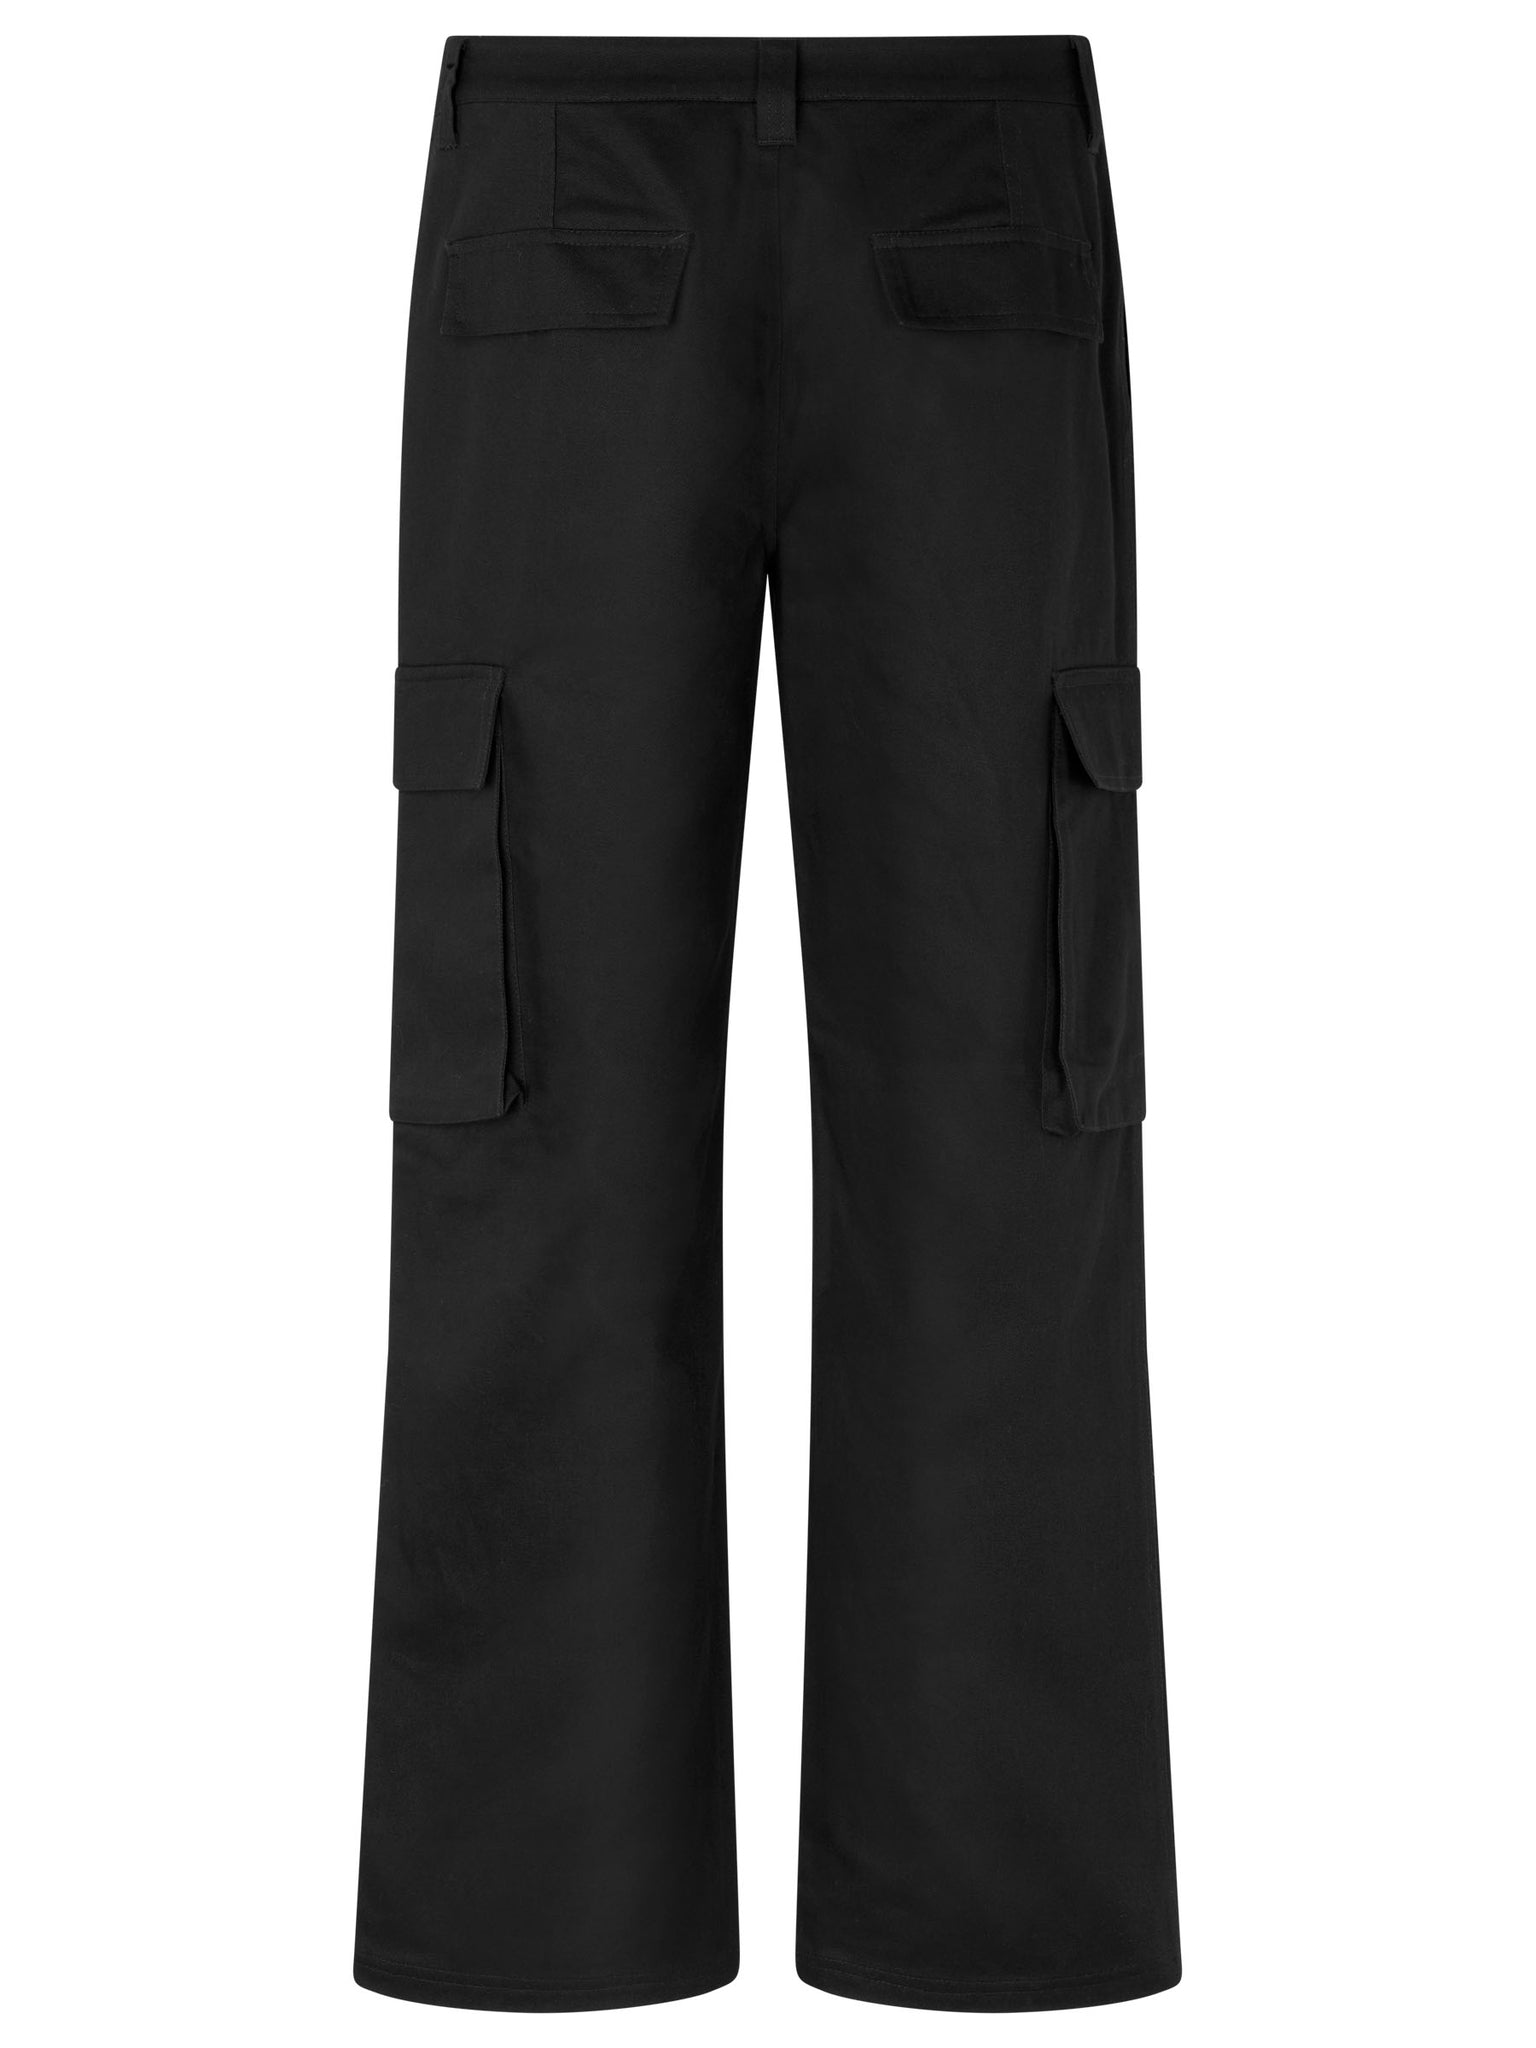 Cargo trousers for girls